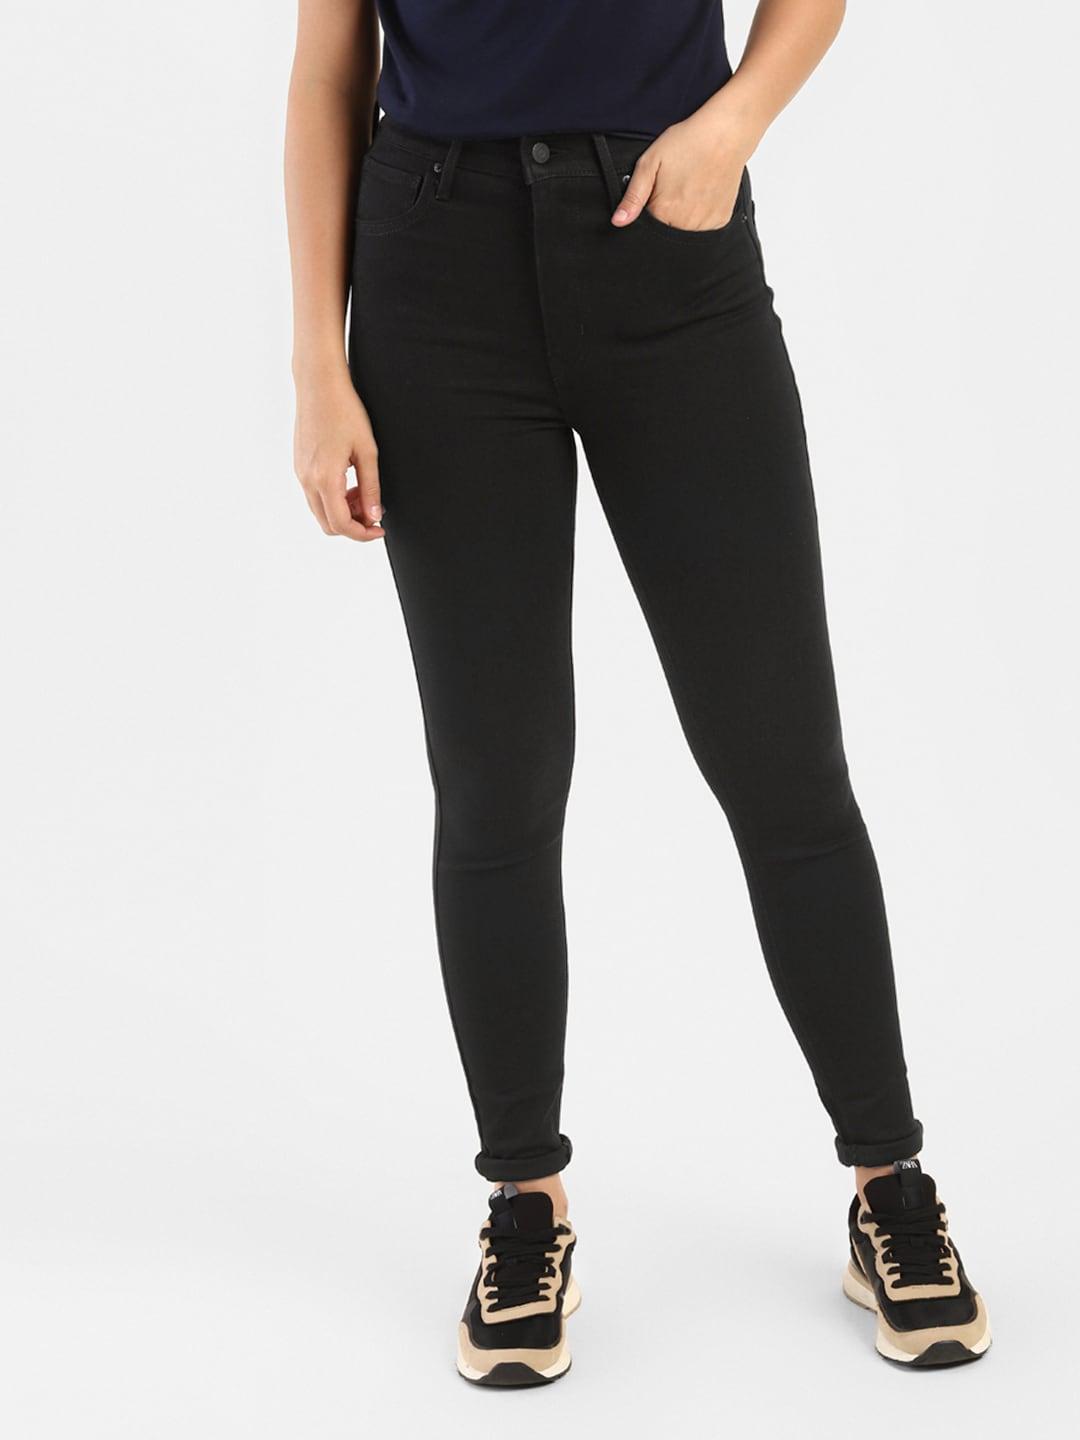 levis-women-black-mile-high-super-skinny-fit-high-rise-stretchable-jeans